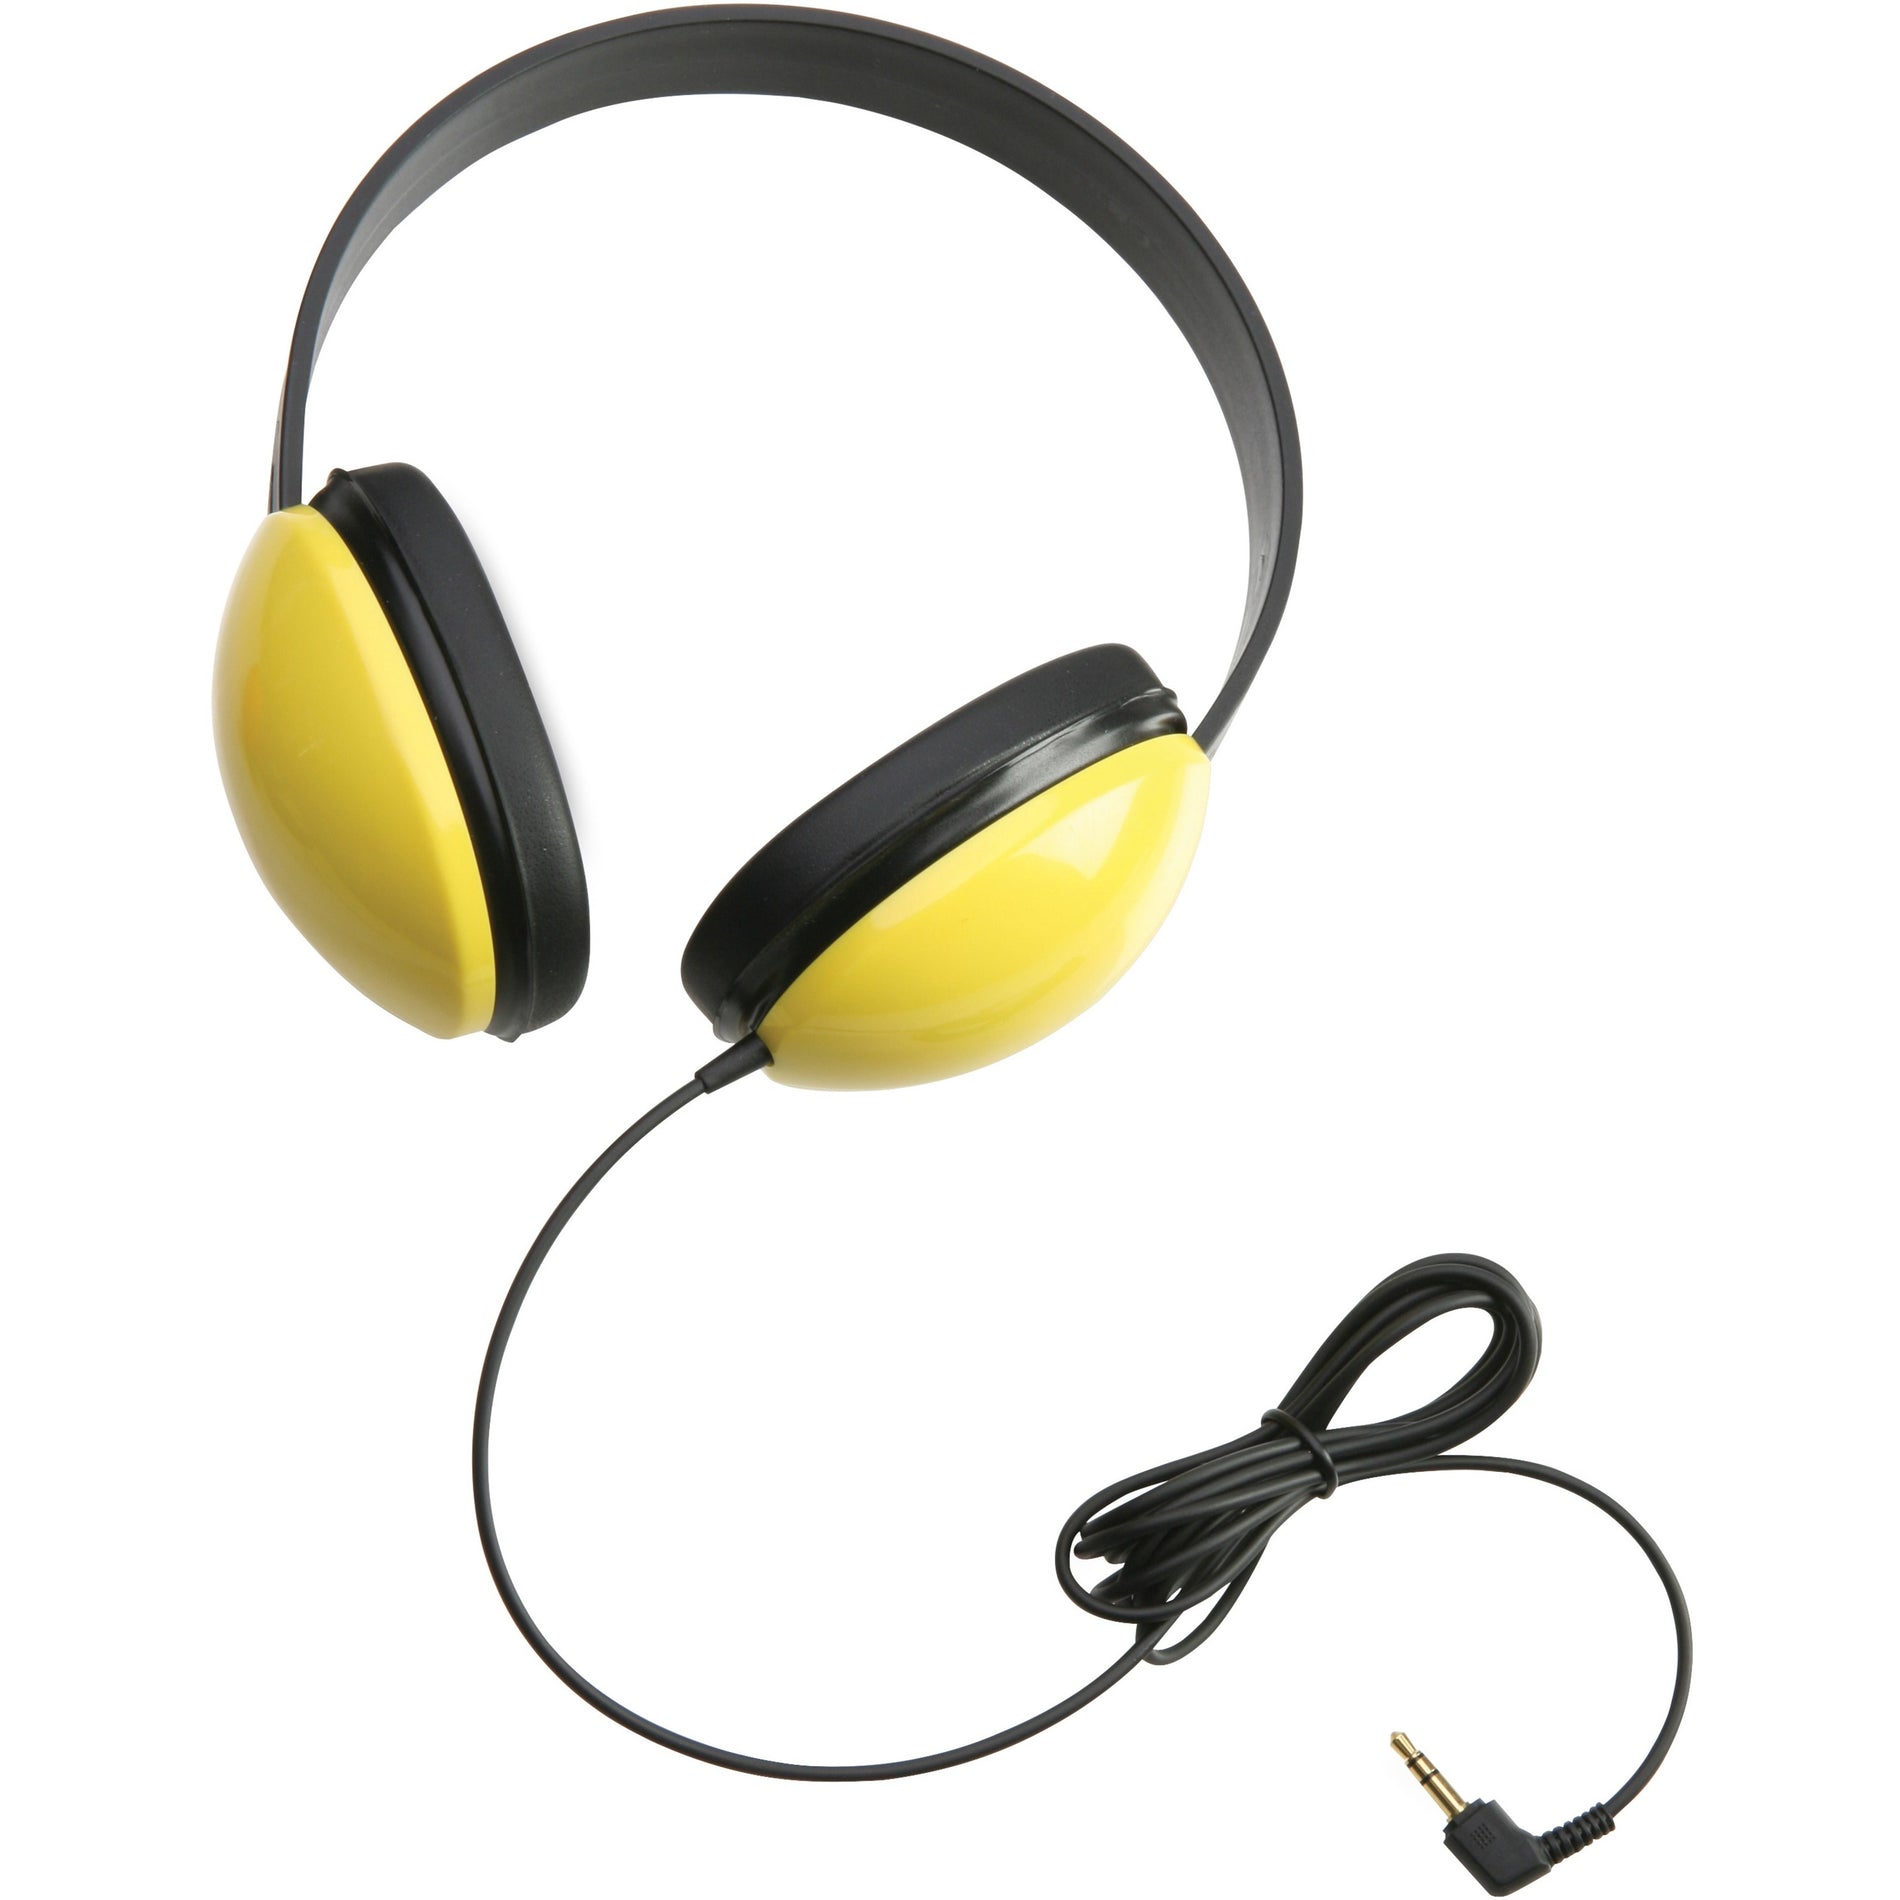 Califone 2800-YL Listening First Stereo Headphones, Over-the-head, Volume Control, 2 Year Warranty